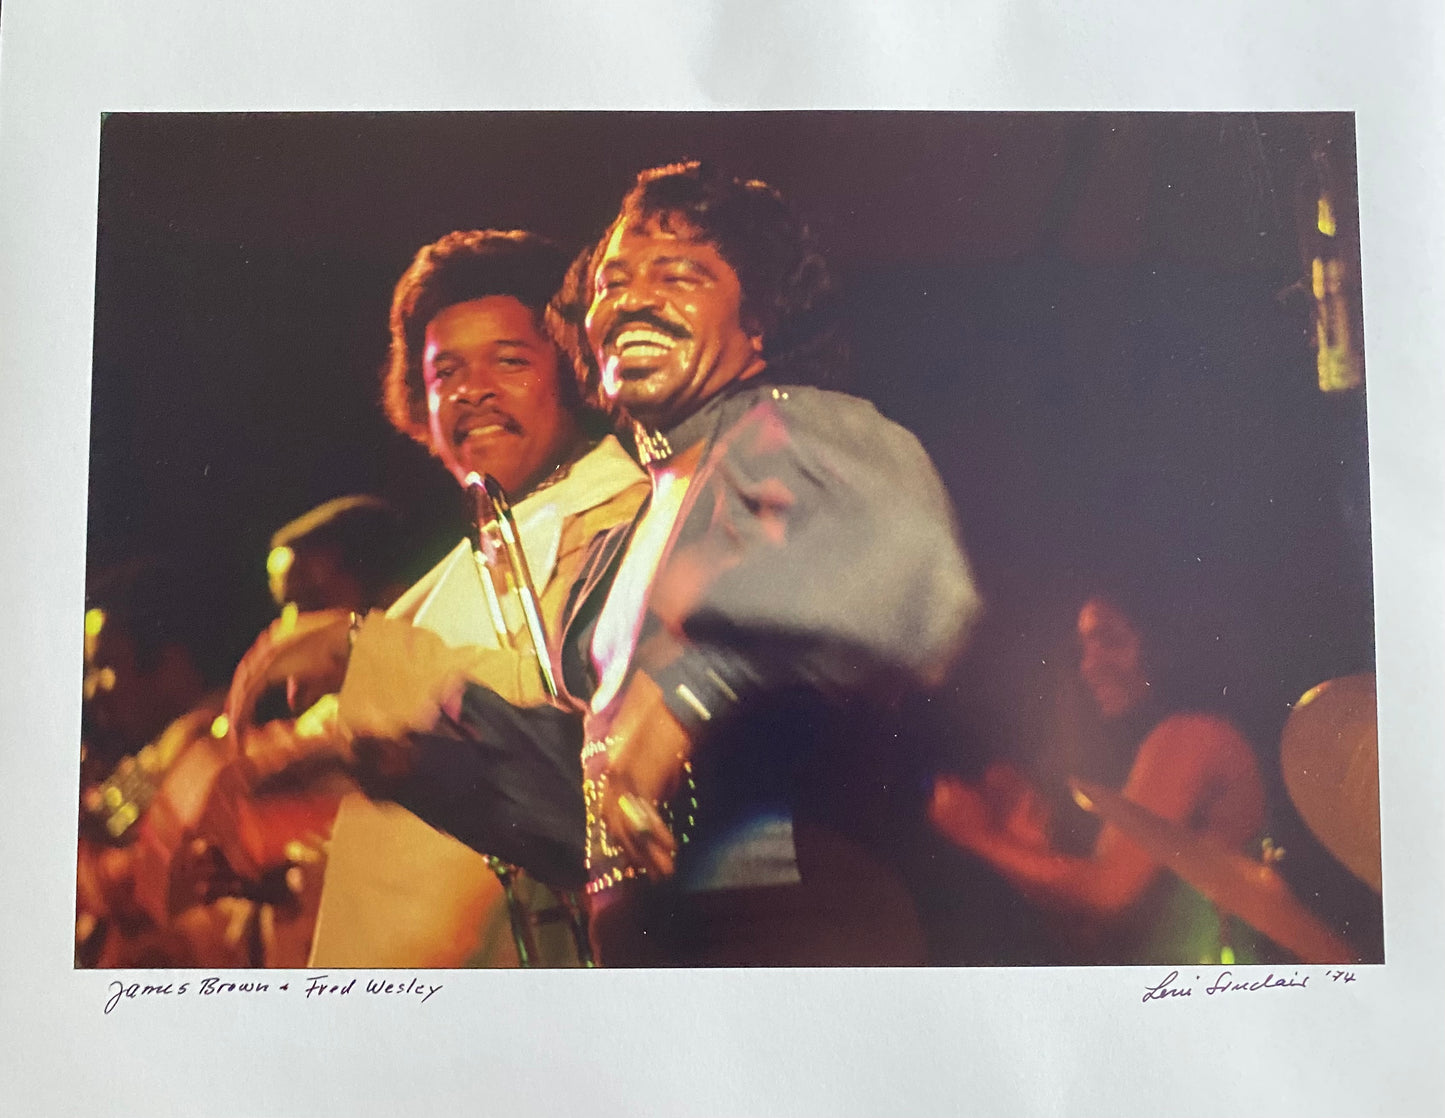 James Brown & Fred Wesley 1974-Leni Sinclair photo